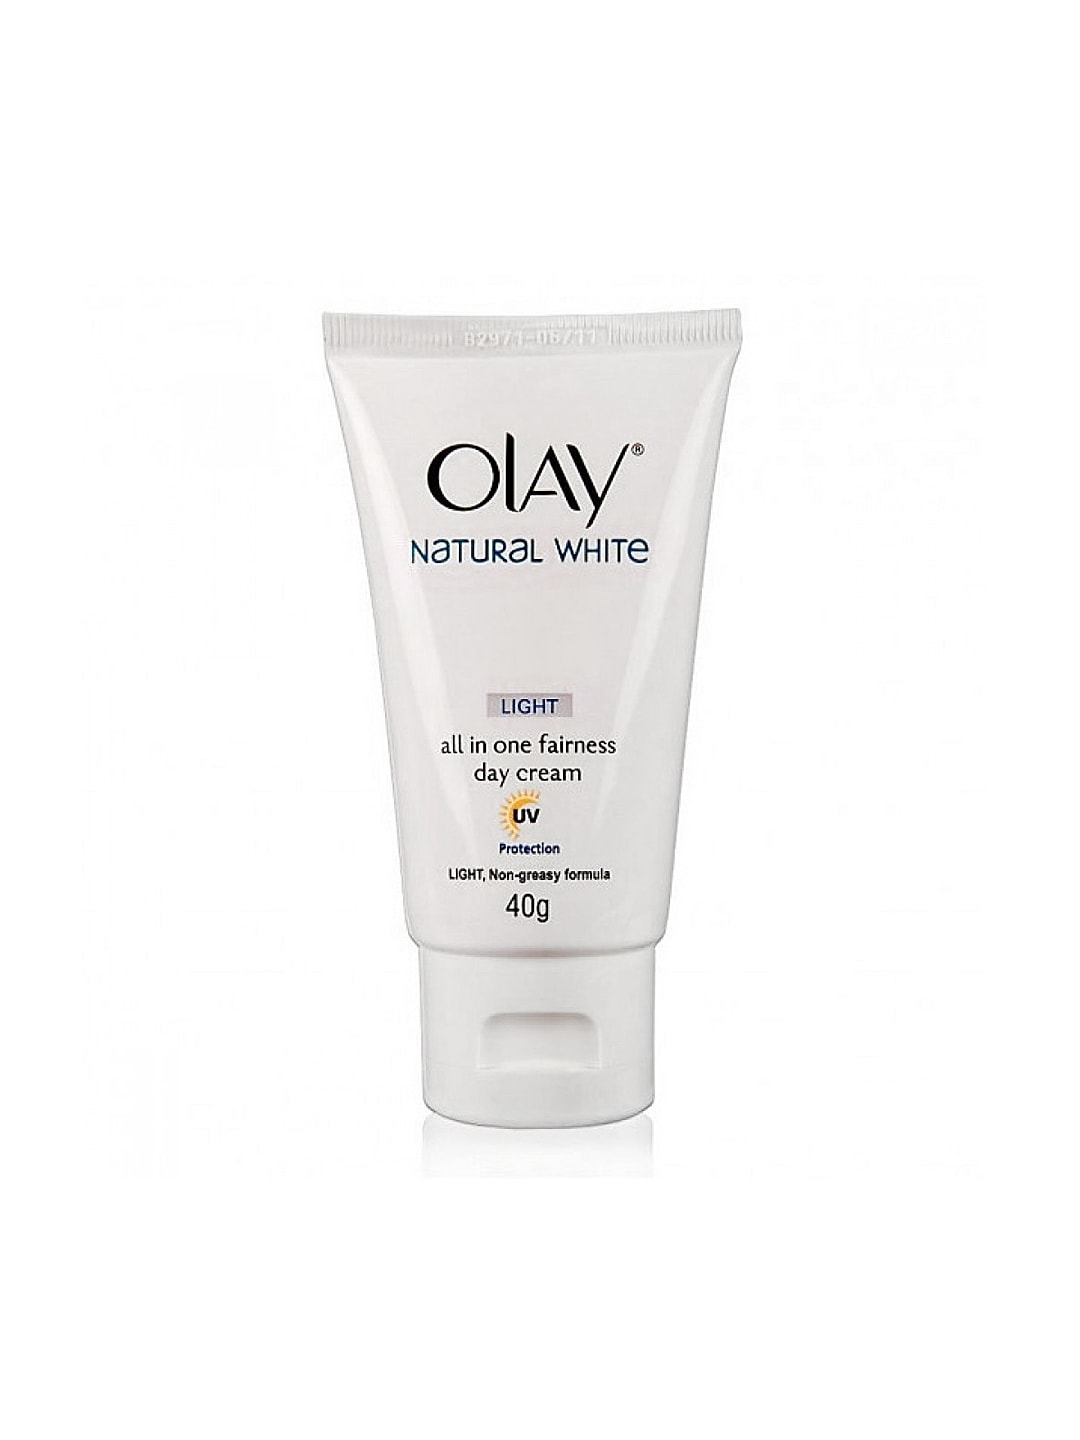 Olay Women Natural White Light All in One Fairness Day Cream 40g